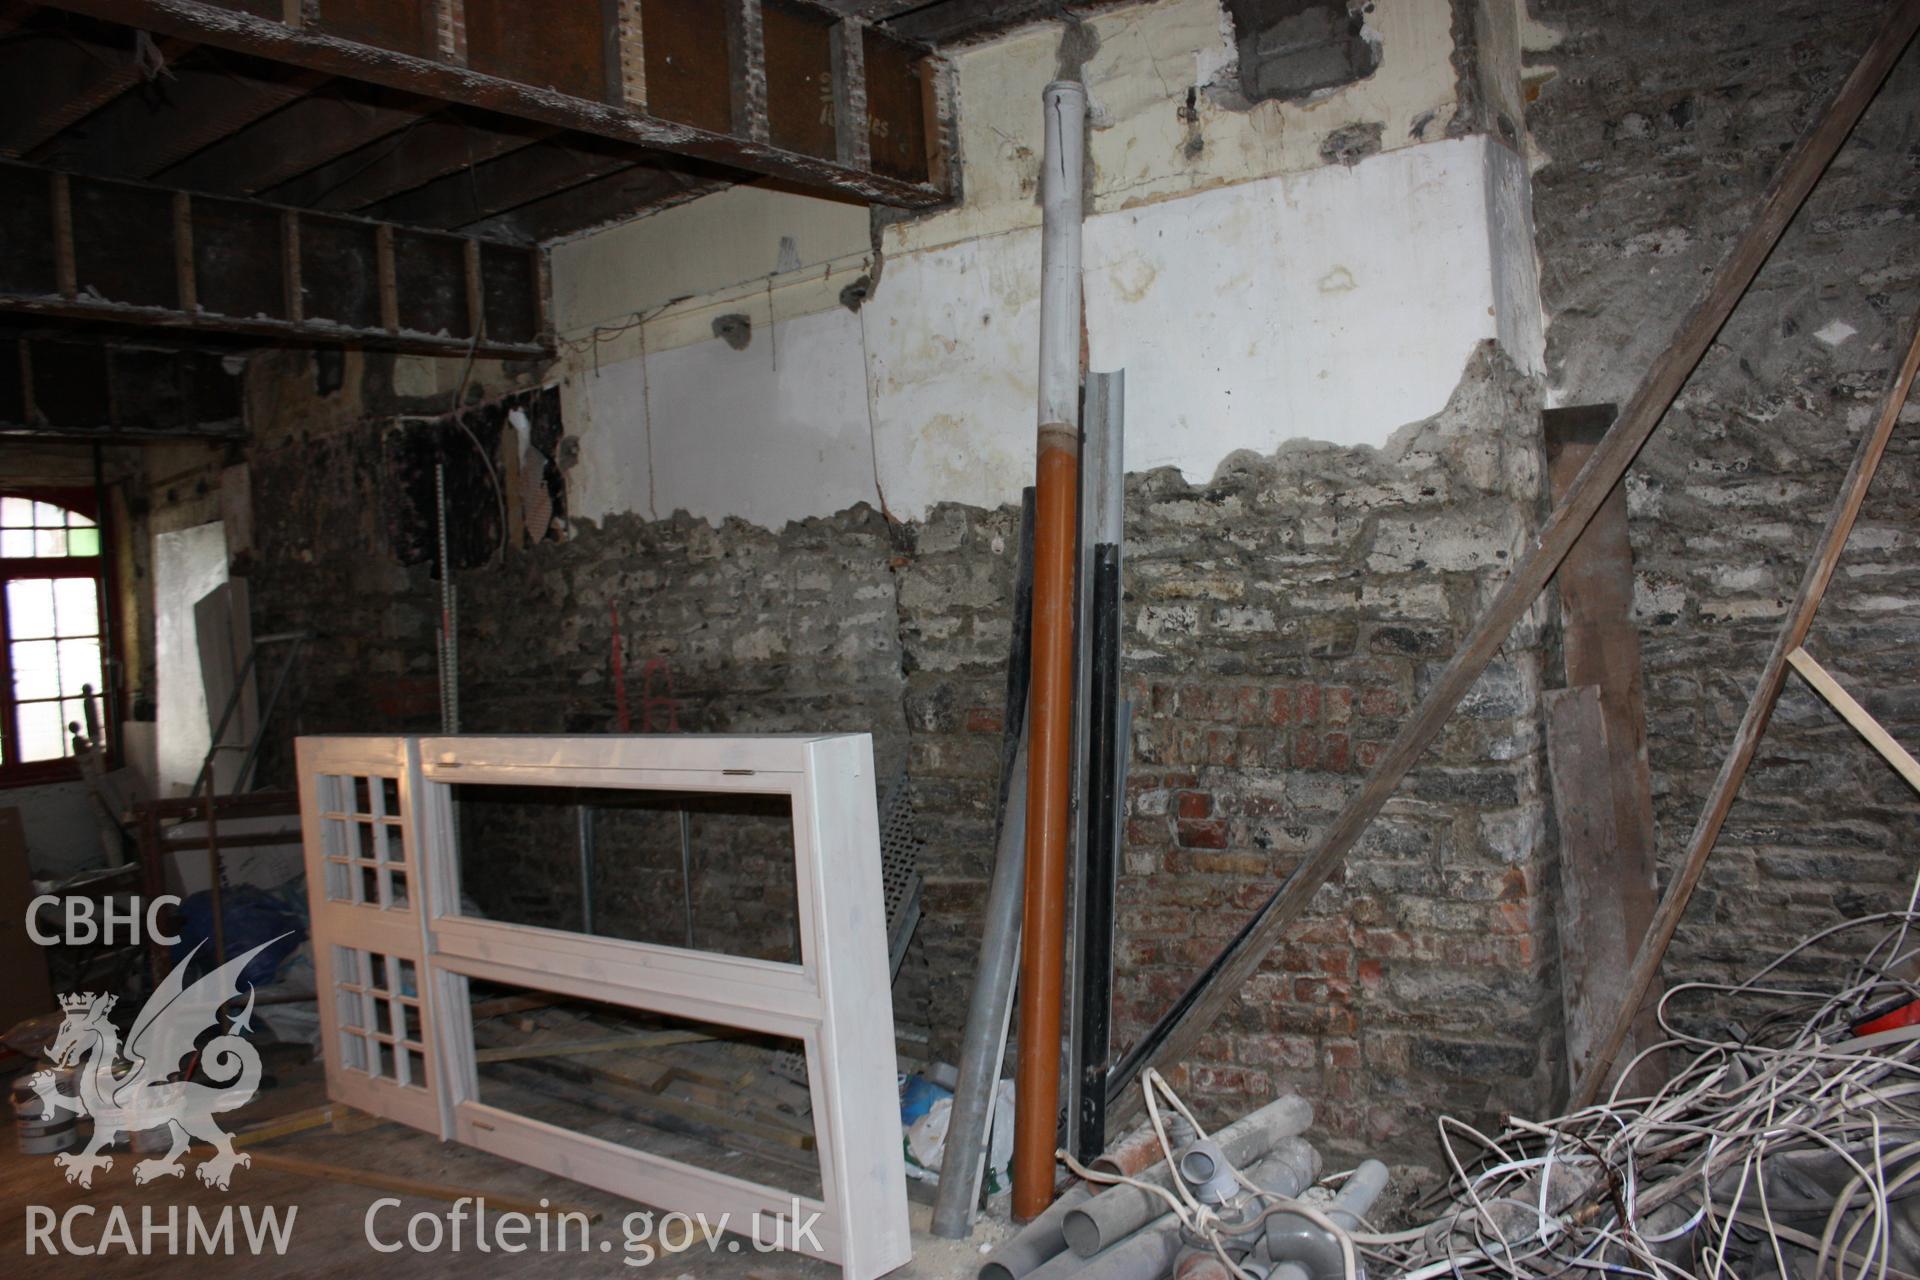 Colour photograph showing interior view of ground floor fireplaces at the Old Auction Rooms/ Liberal Club in Aberystwyth. Photographic survey conducted by Geoff Ward on 9th June 2010 during repair work prior to conversion into flats.